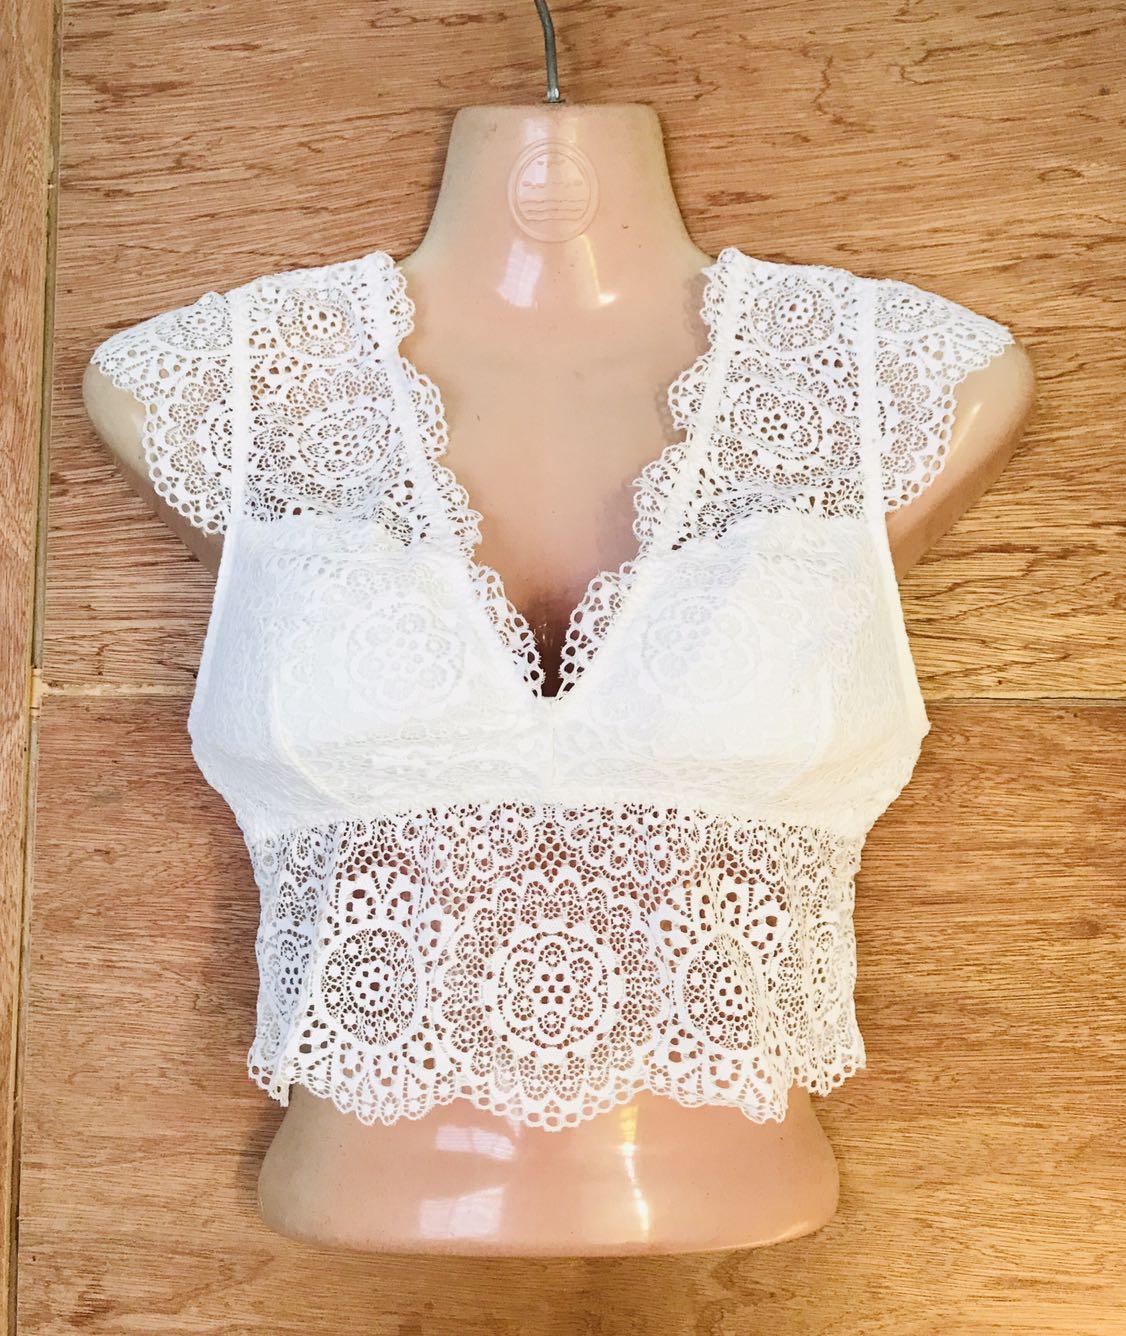 Hollister Gilly Hicks geo lace cap sleeve bralette in white Small, Women's  Fashion, Tops, Sleeveless on Carousell